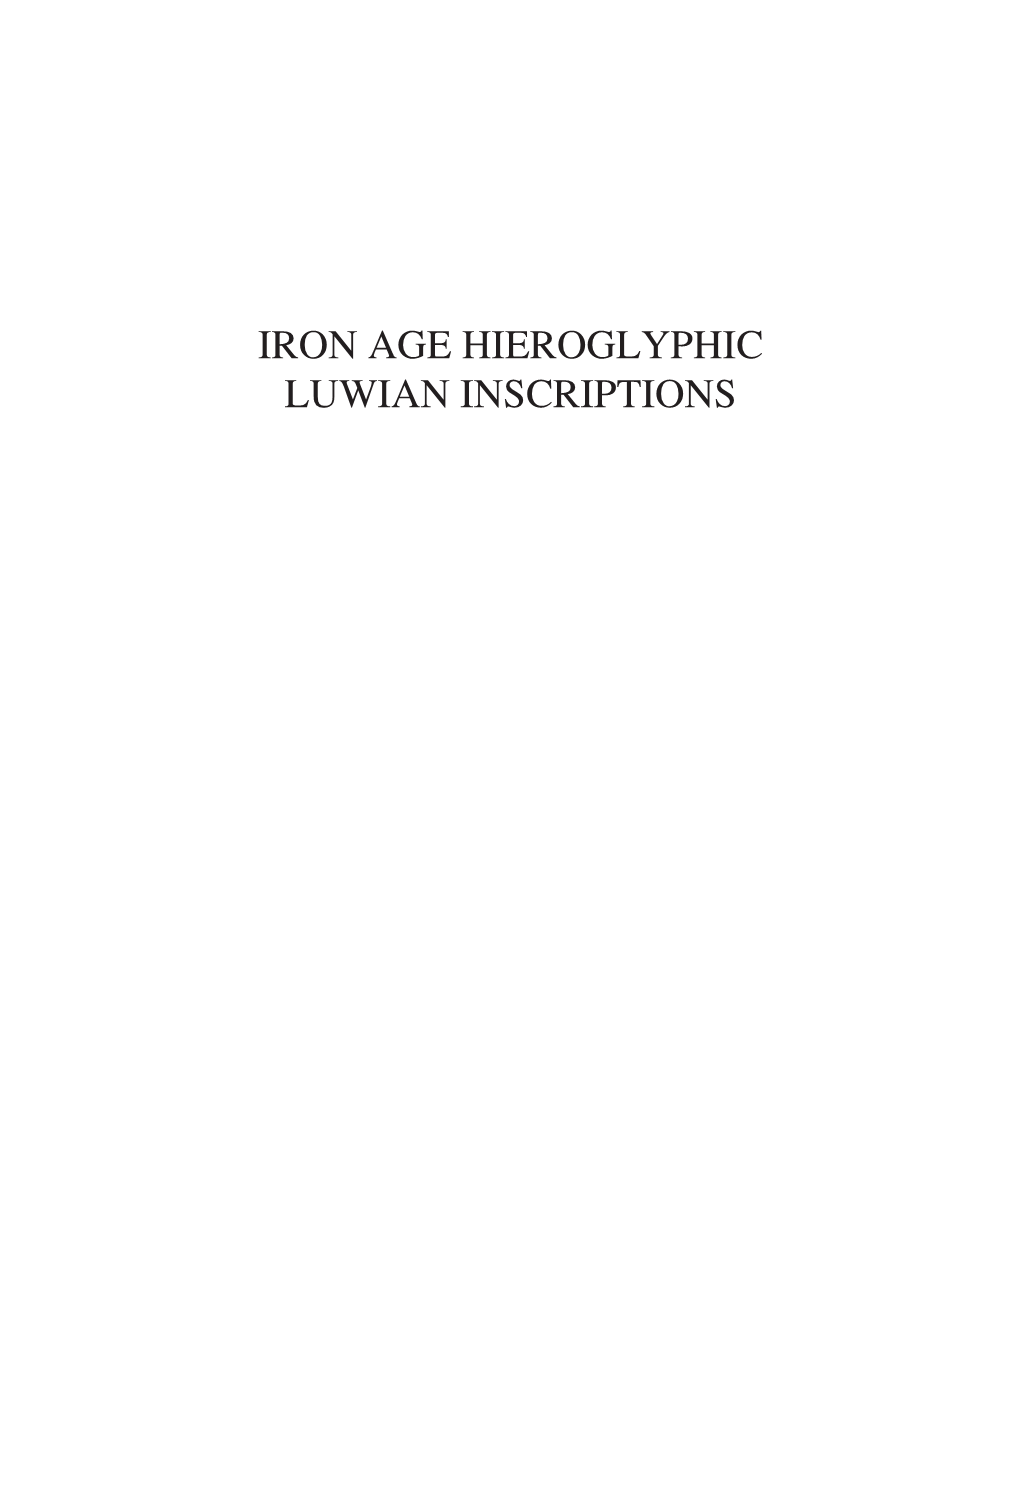 IRON AGE Hieroglyphic Luwian Inscriptions Writings from the Ancient World